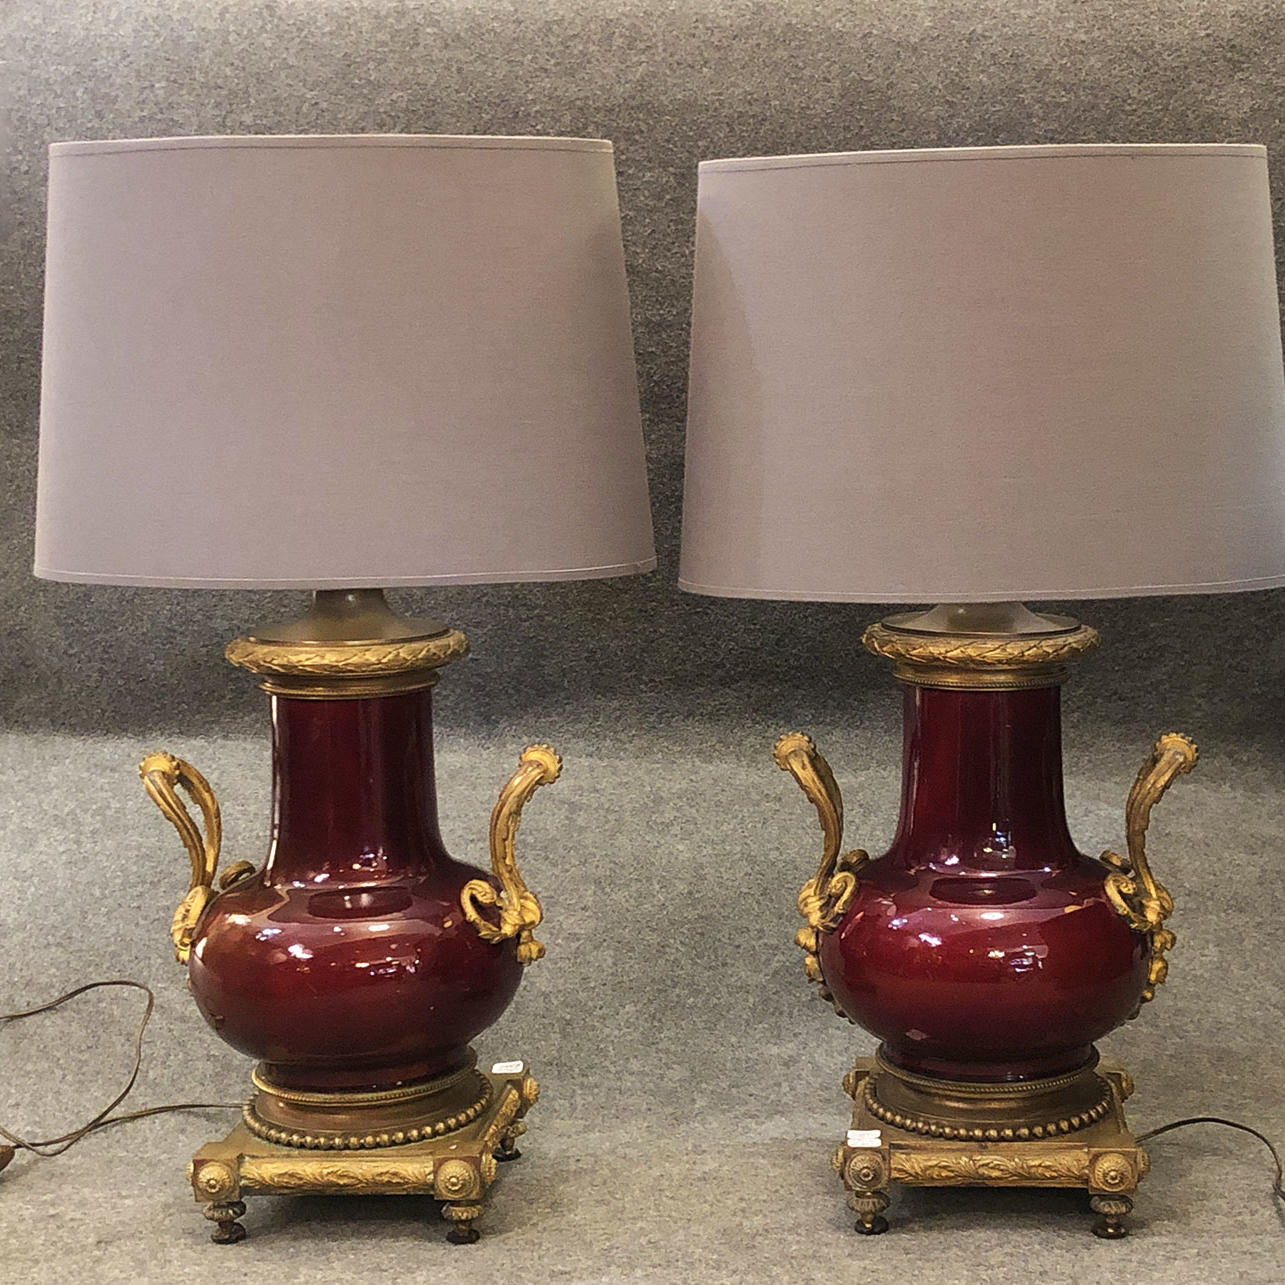 Pair of Oxblood Red Lamps, 19th Century